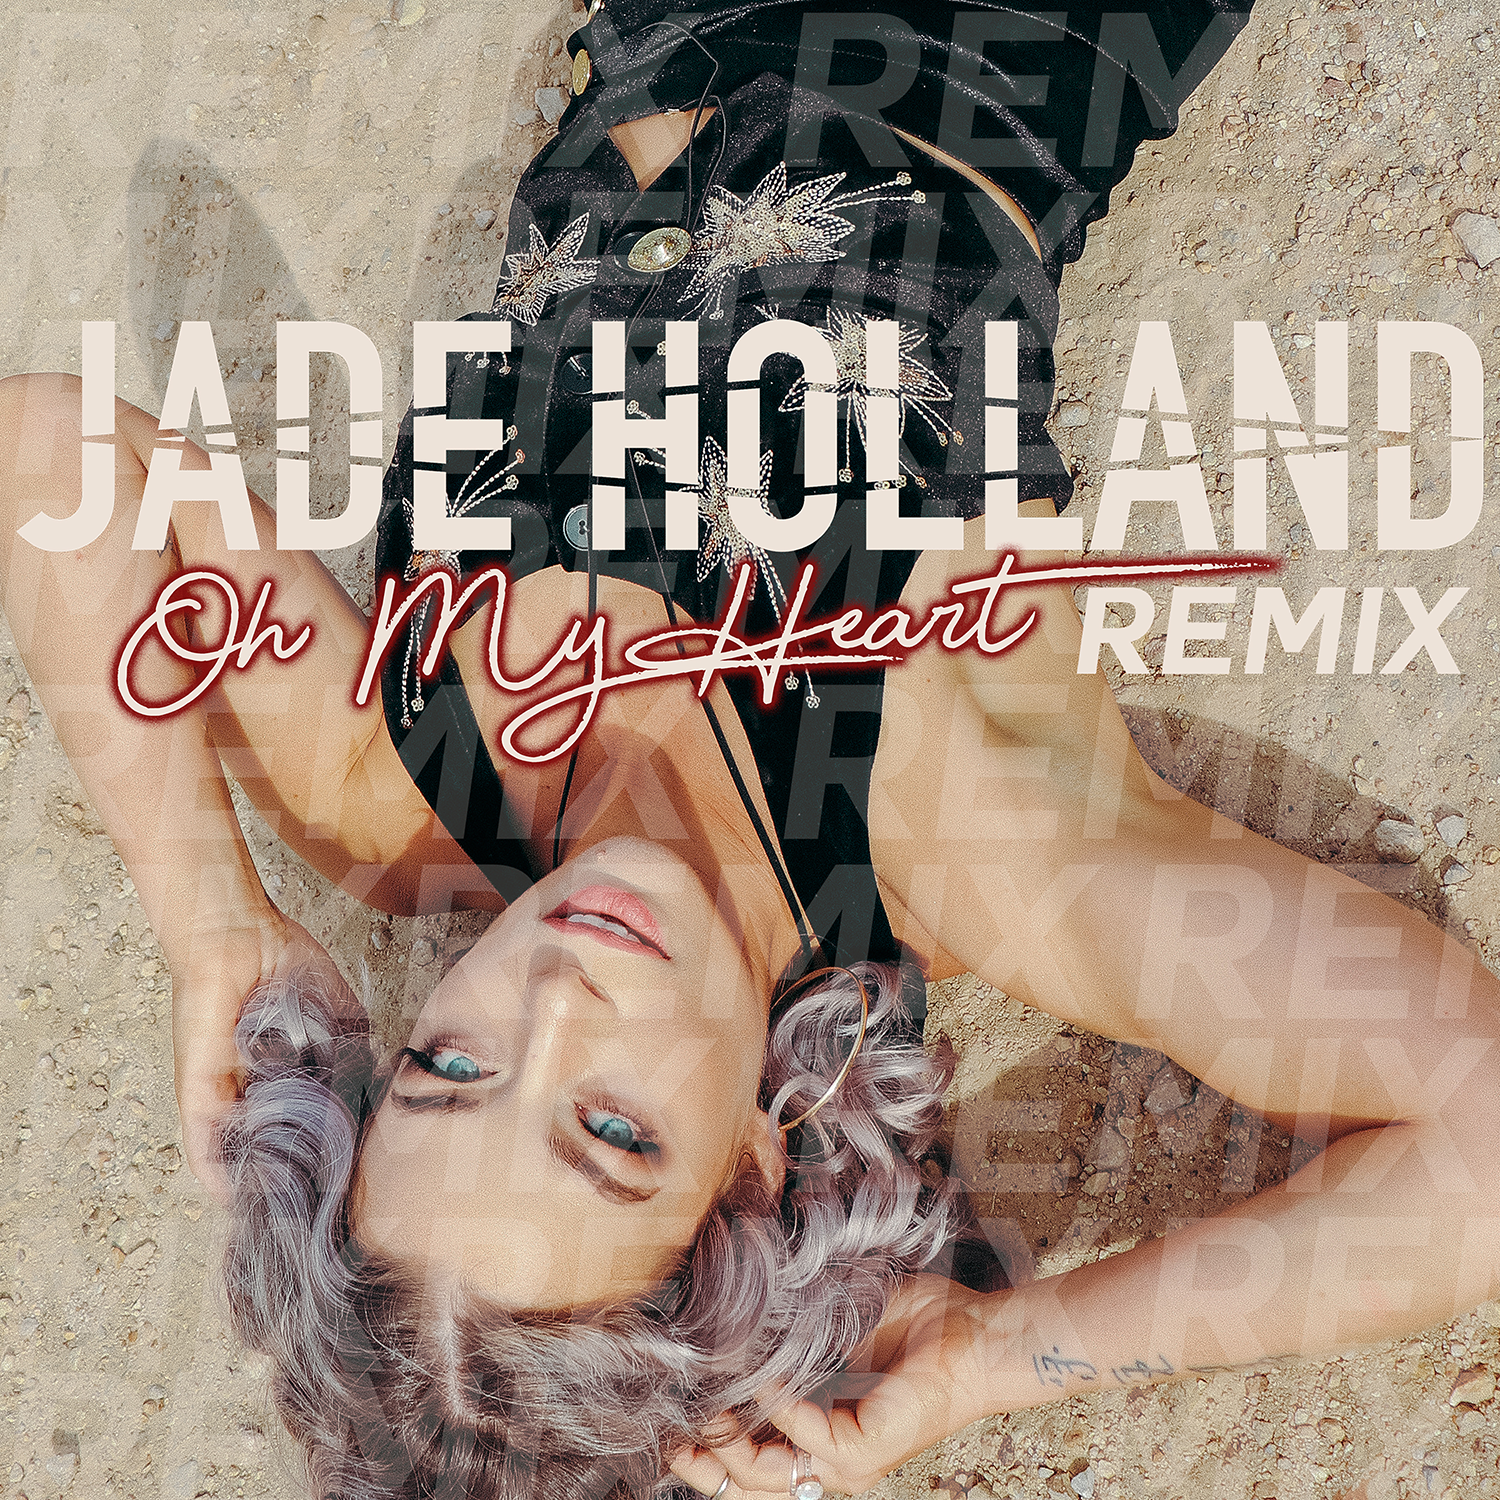 Jade_Holland_Single_Cover_OMH_Dance_Remix_1500.png